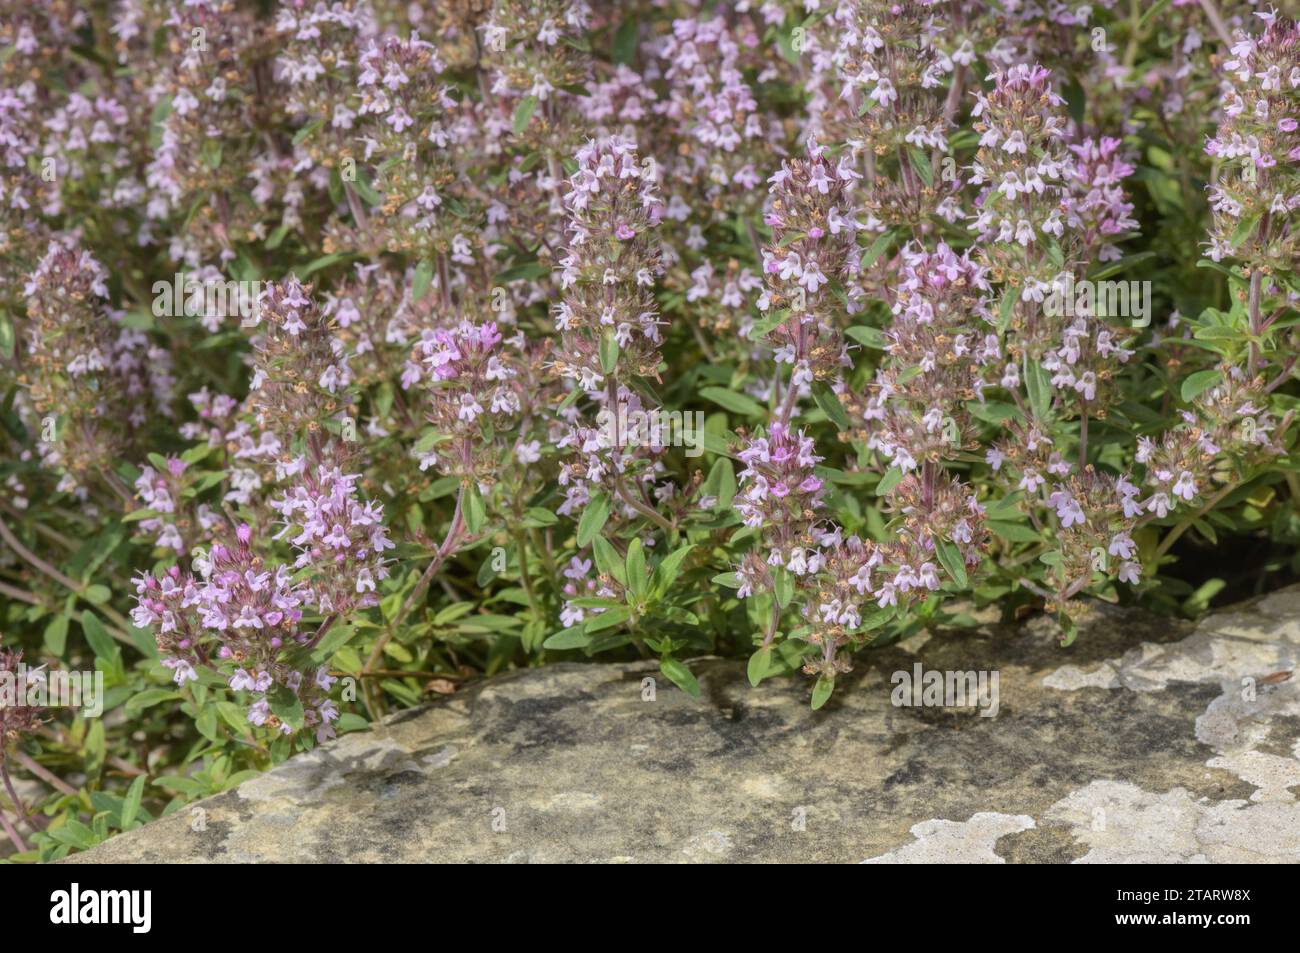 A Wild Thyme, Thymus sibthorpii from south-east Europe. Stock Photo